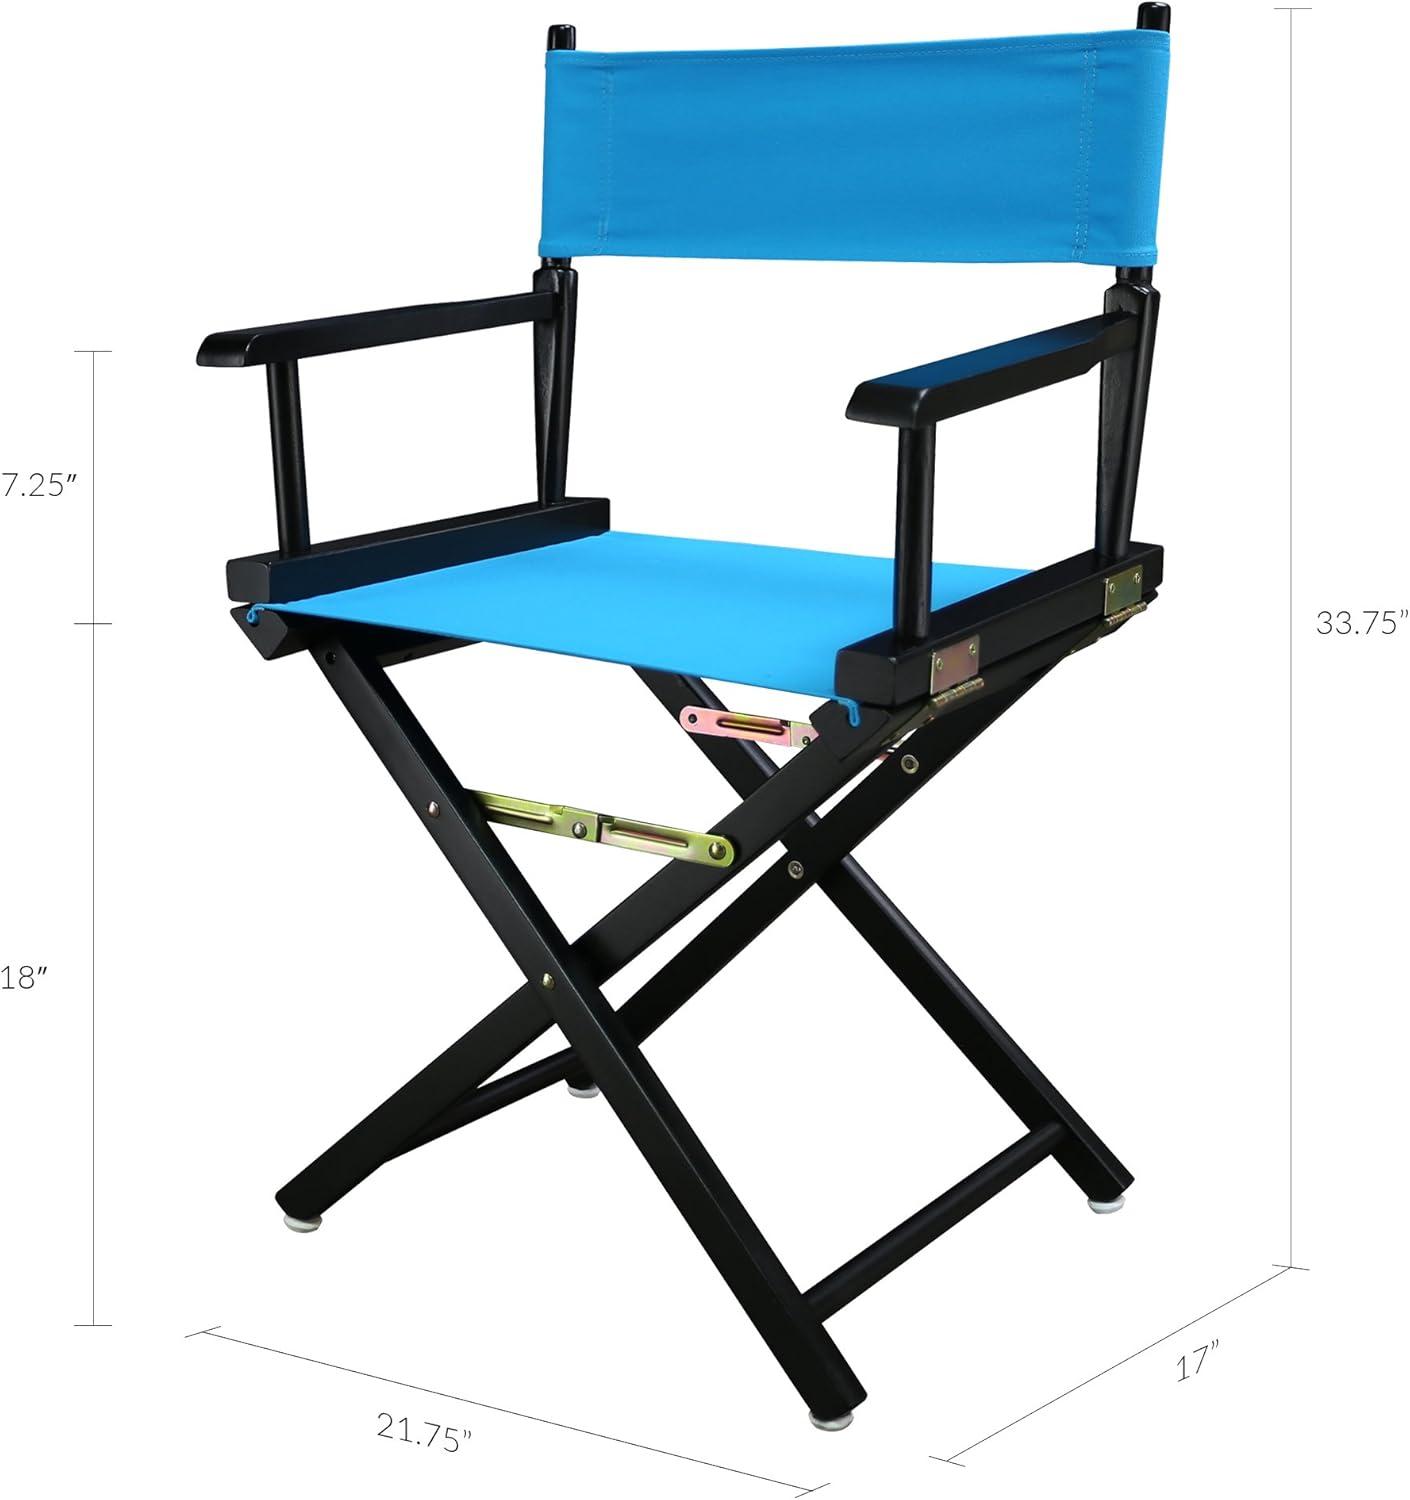 Foldable Classic Director's Chair in Black and Turquoise, Solid Wood